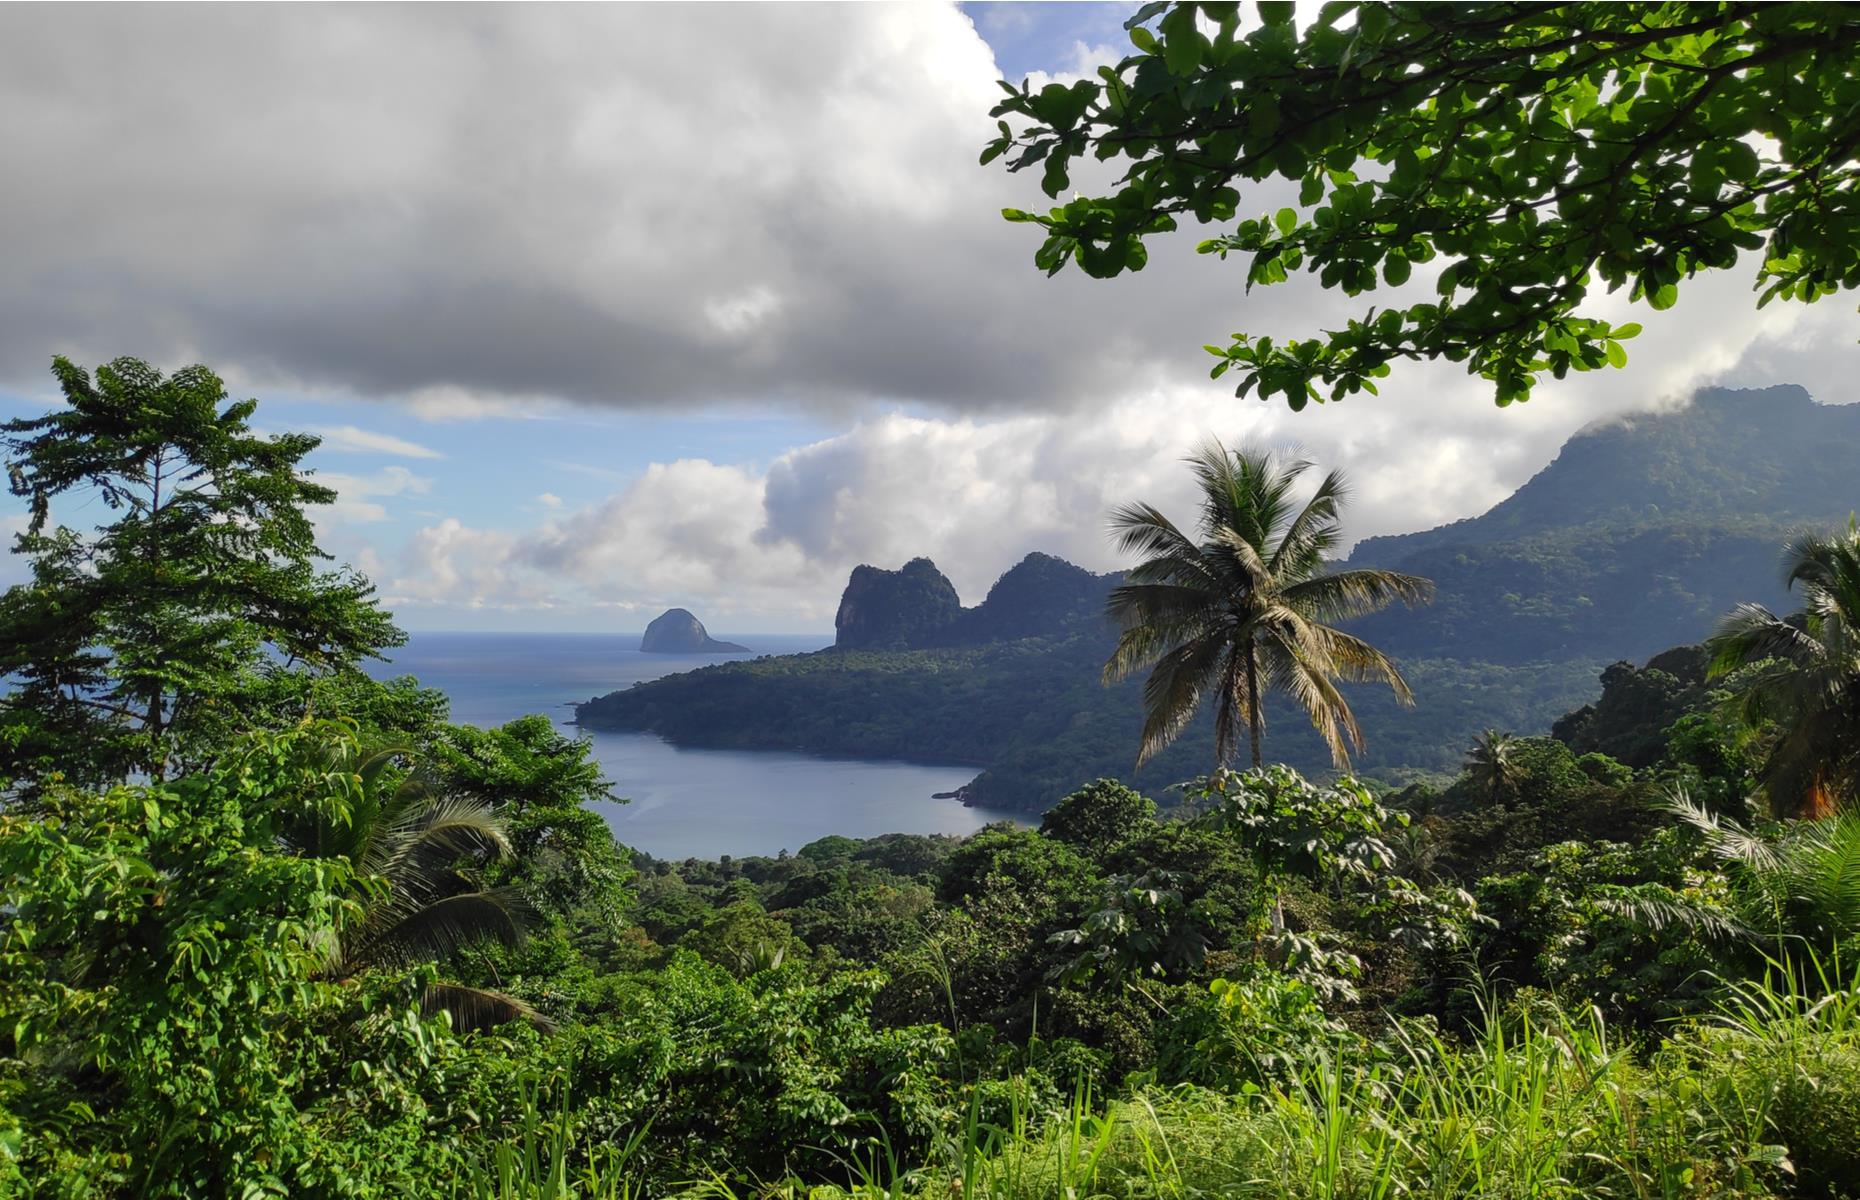 <p>The islands are in West Africa’s Gulf of Guinea and smaller Príncipe – together with surrounding islets – is a designated <a href="http://www.unesco.org/new/en/natural-sciences/environment/ecological-sciences/biosphere-reserves/africa/sao-tome-and-principe/the-island-of-principe/">UNESCO Biosphere Reserve</a>, home to a rich array of endemic plants and wildlife. Travelers might find rare orchids, reed frogs and vibrantly colored birds in the tropical and rainforest, interspersed with mountains and volcanic peaks. Visitor numbers are on the up thanks to a tourism drive – back in 2010, <a href="https://edition.cnn.com/travel/article/sao-tome-and-principe-africa/index.html">just 7,900 people ventured to the tiny archipelago</a>.</p>